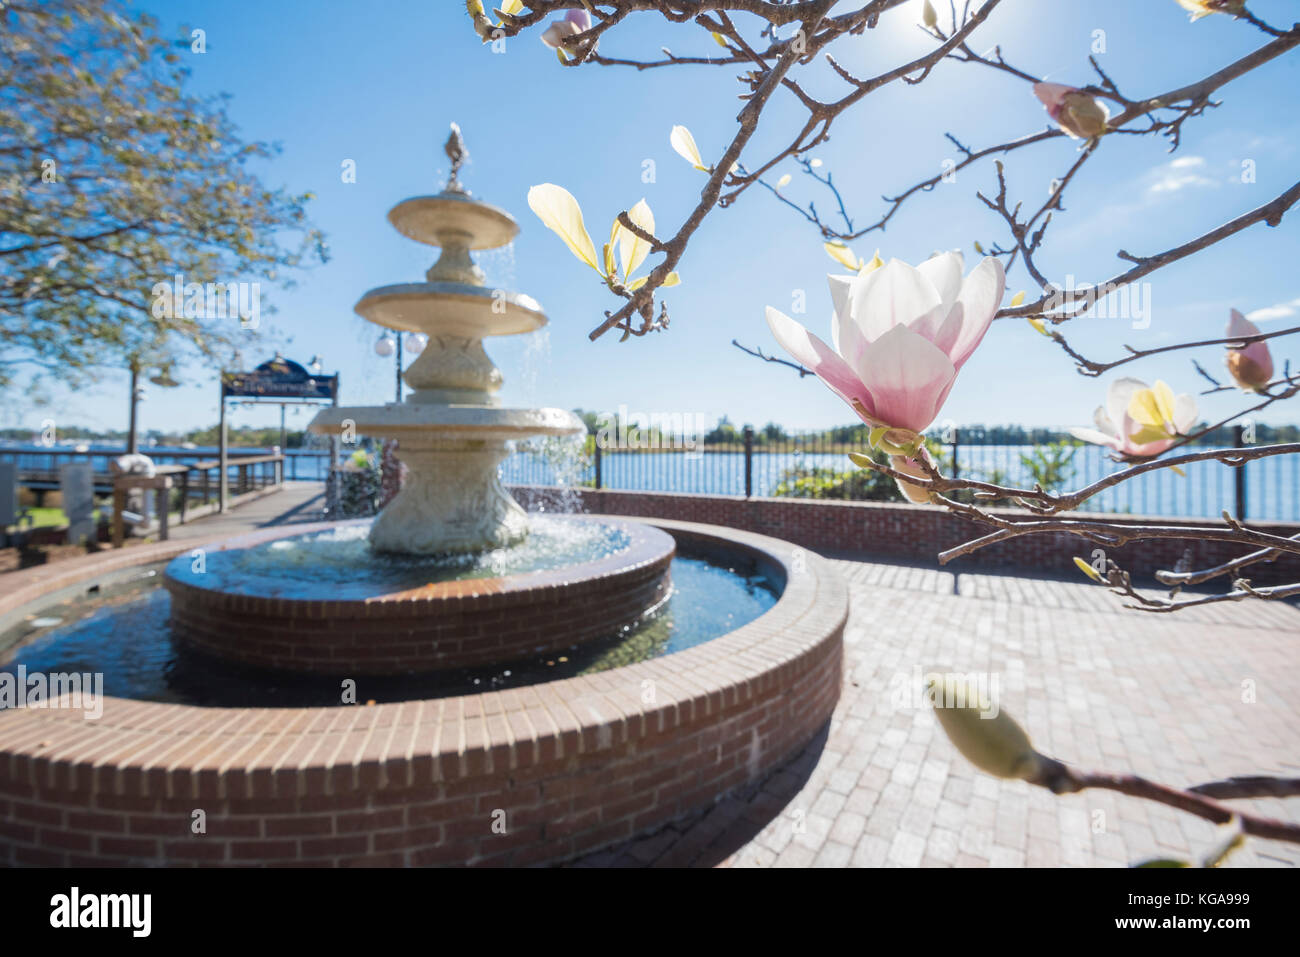 The fountain at the Georgetown Marina in SC Stock Photo